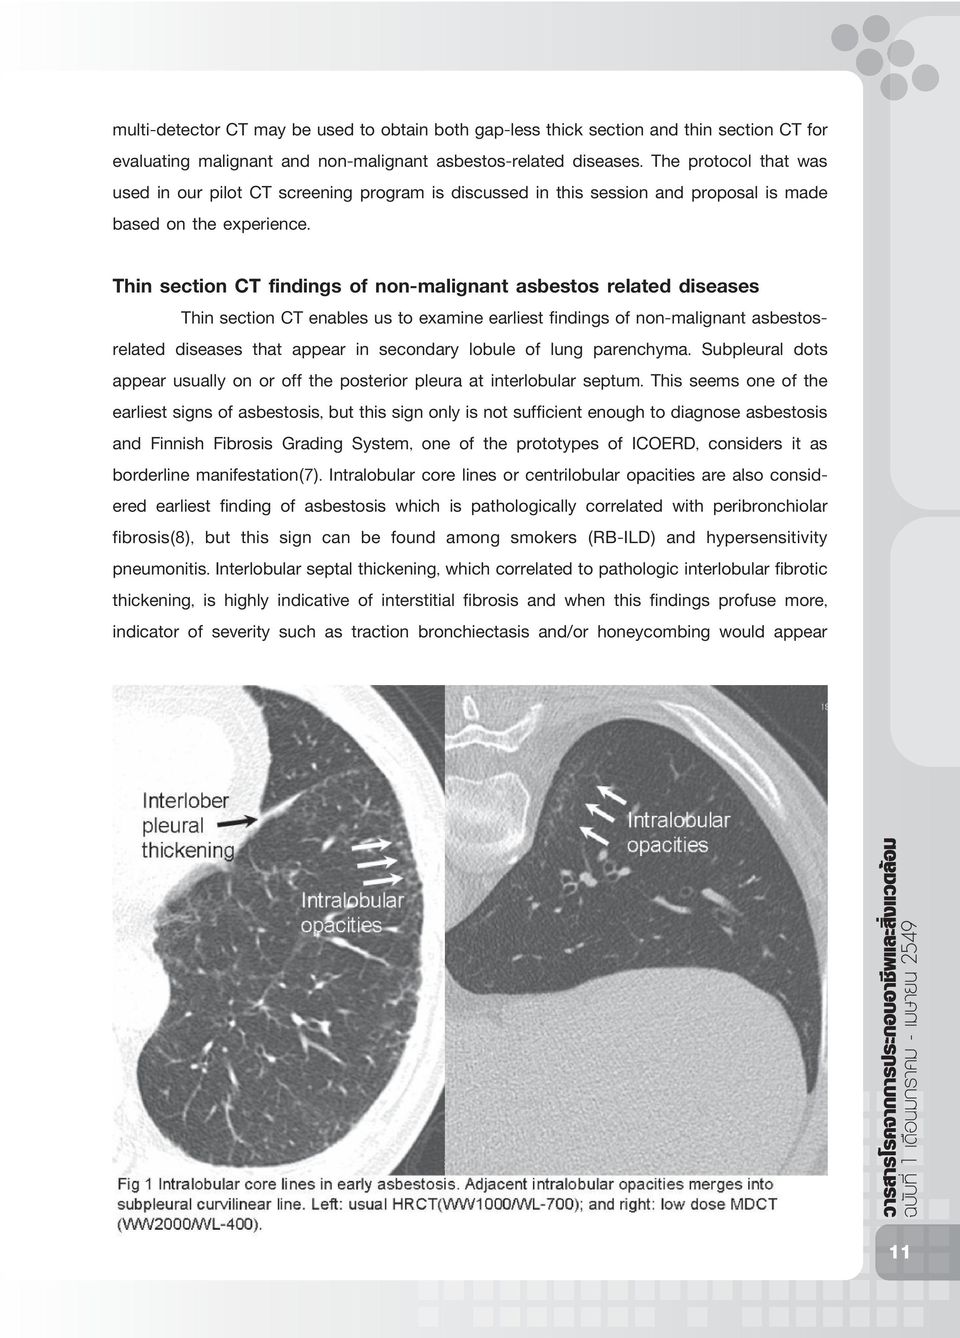 Thin section CT findings of non-malignant asbestos related diseases Thin section CT enables us to examine earliest findings of non-malignant asbestosrelated diseases that appear in secondary lobule